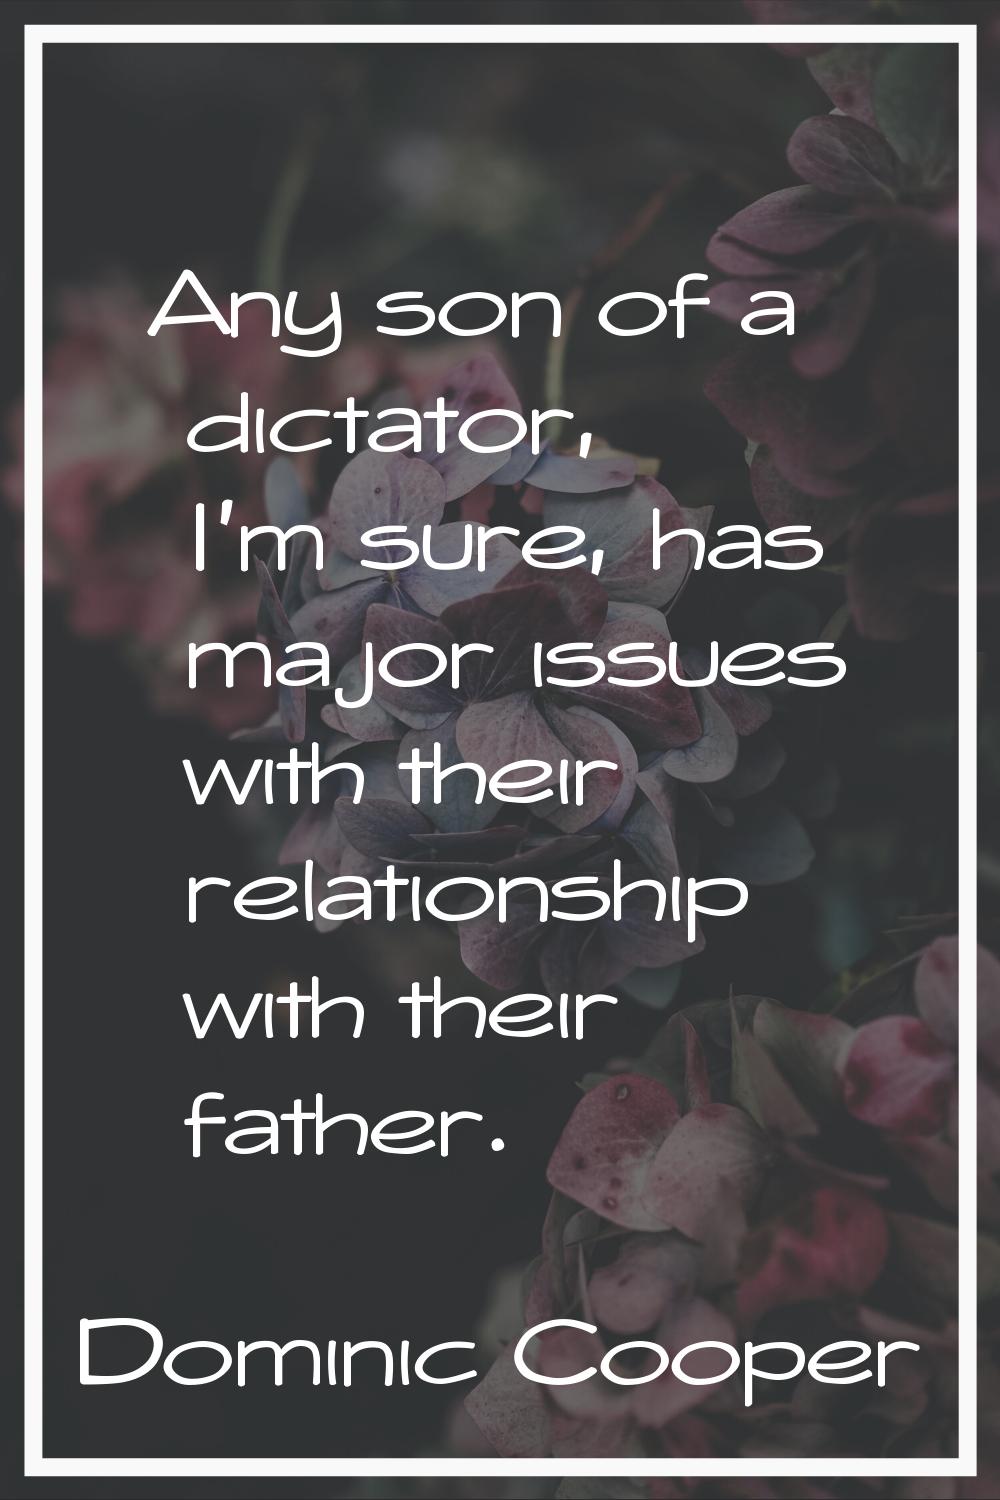 Any son of a dictator, I'm sure, has major issues with their relationship with their father.